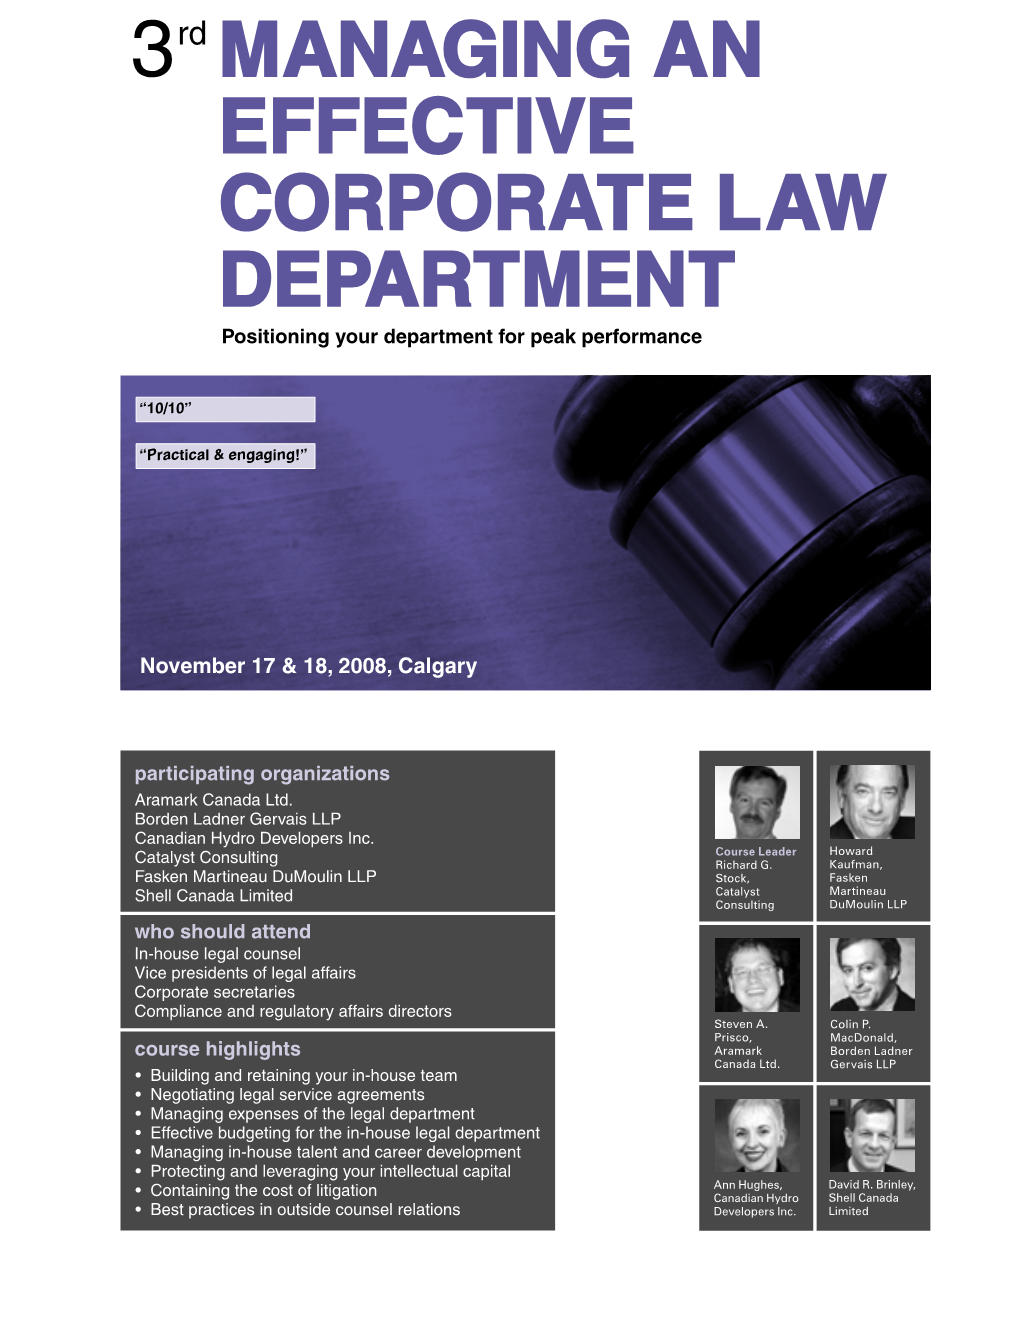 MANAGING an EFFECTIVE CORPORATE LAW DEPARTMENT Positioning Your Department for Peak Performance